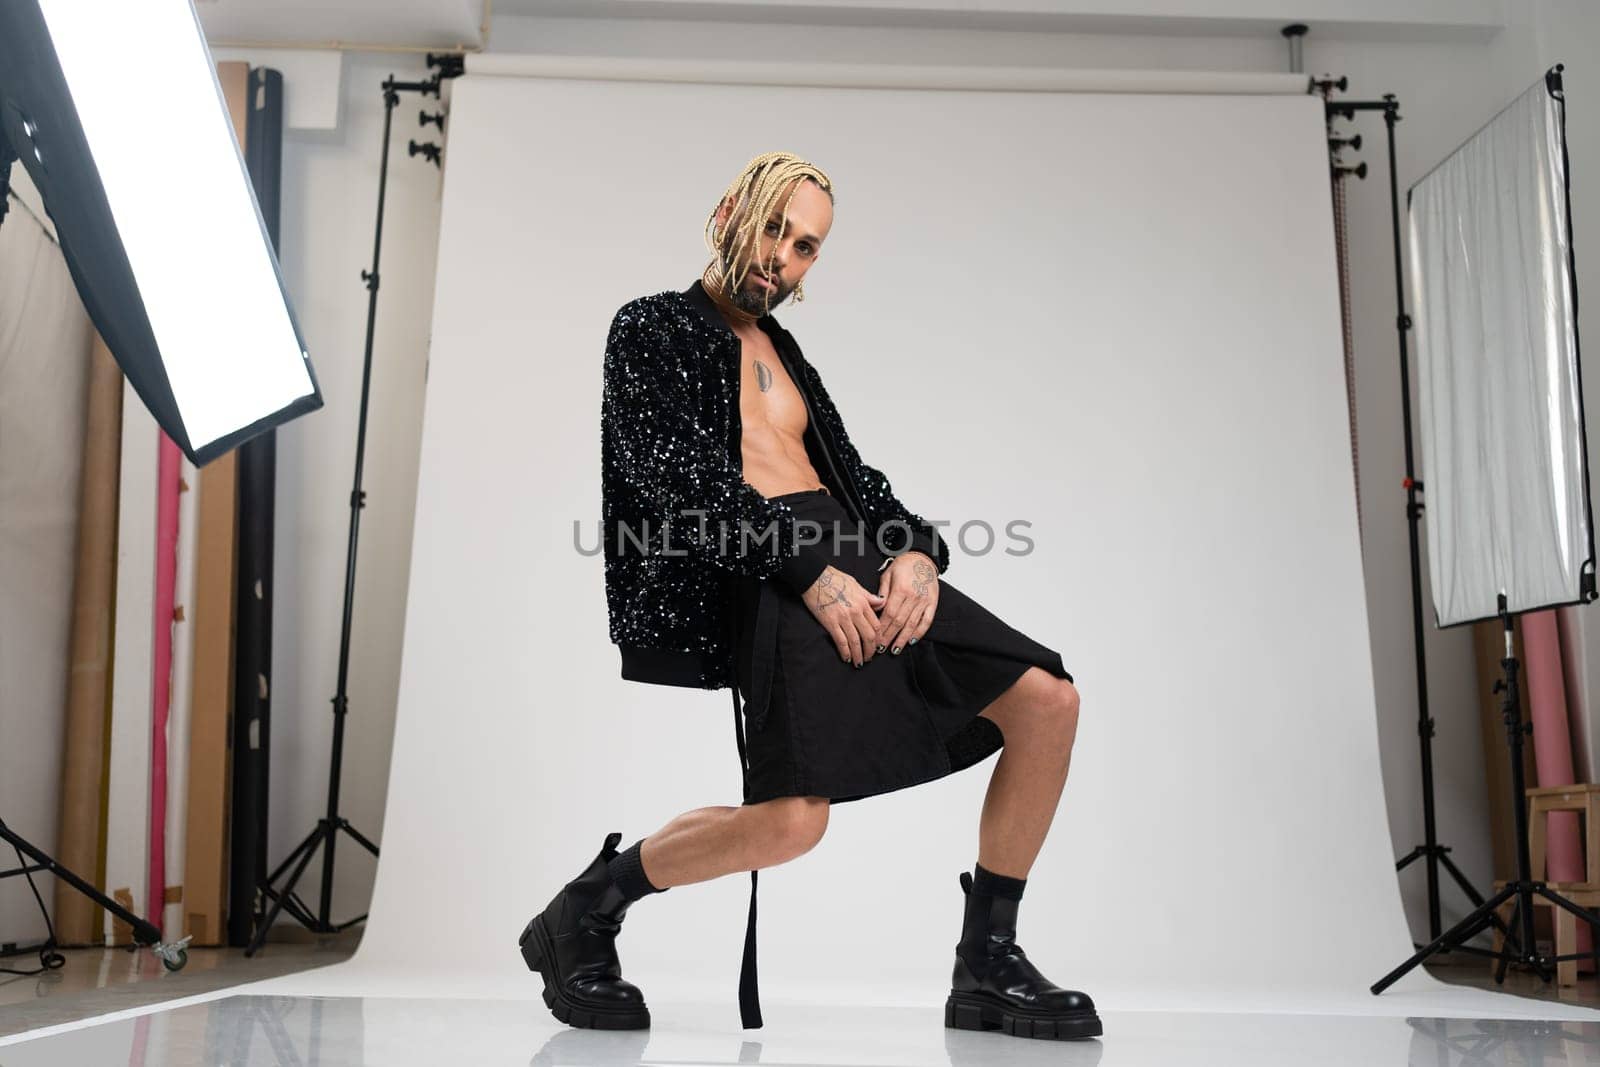 Full length gay man wearing women clothing dancing. Brazilian homosexual male wearing black skirt and boots posing in photo studio on white background. Bearded gay with make up